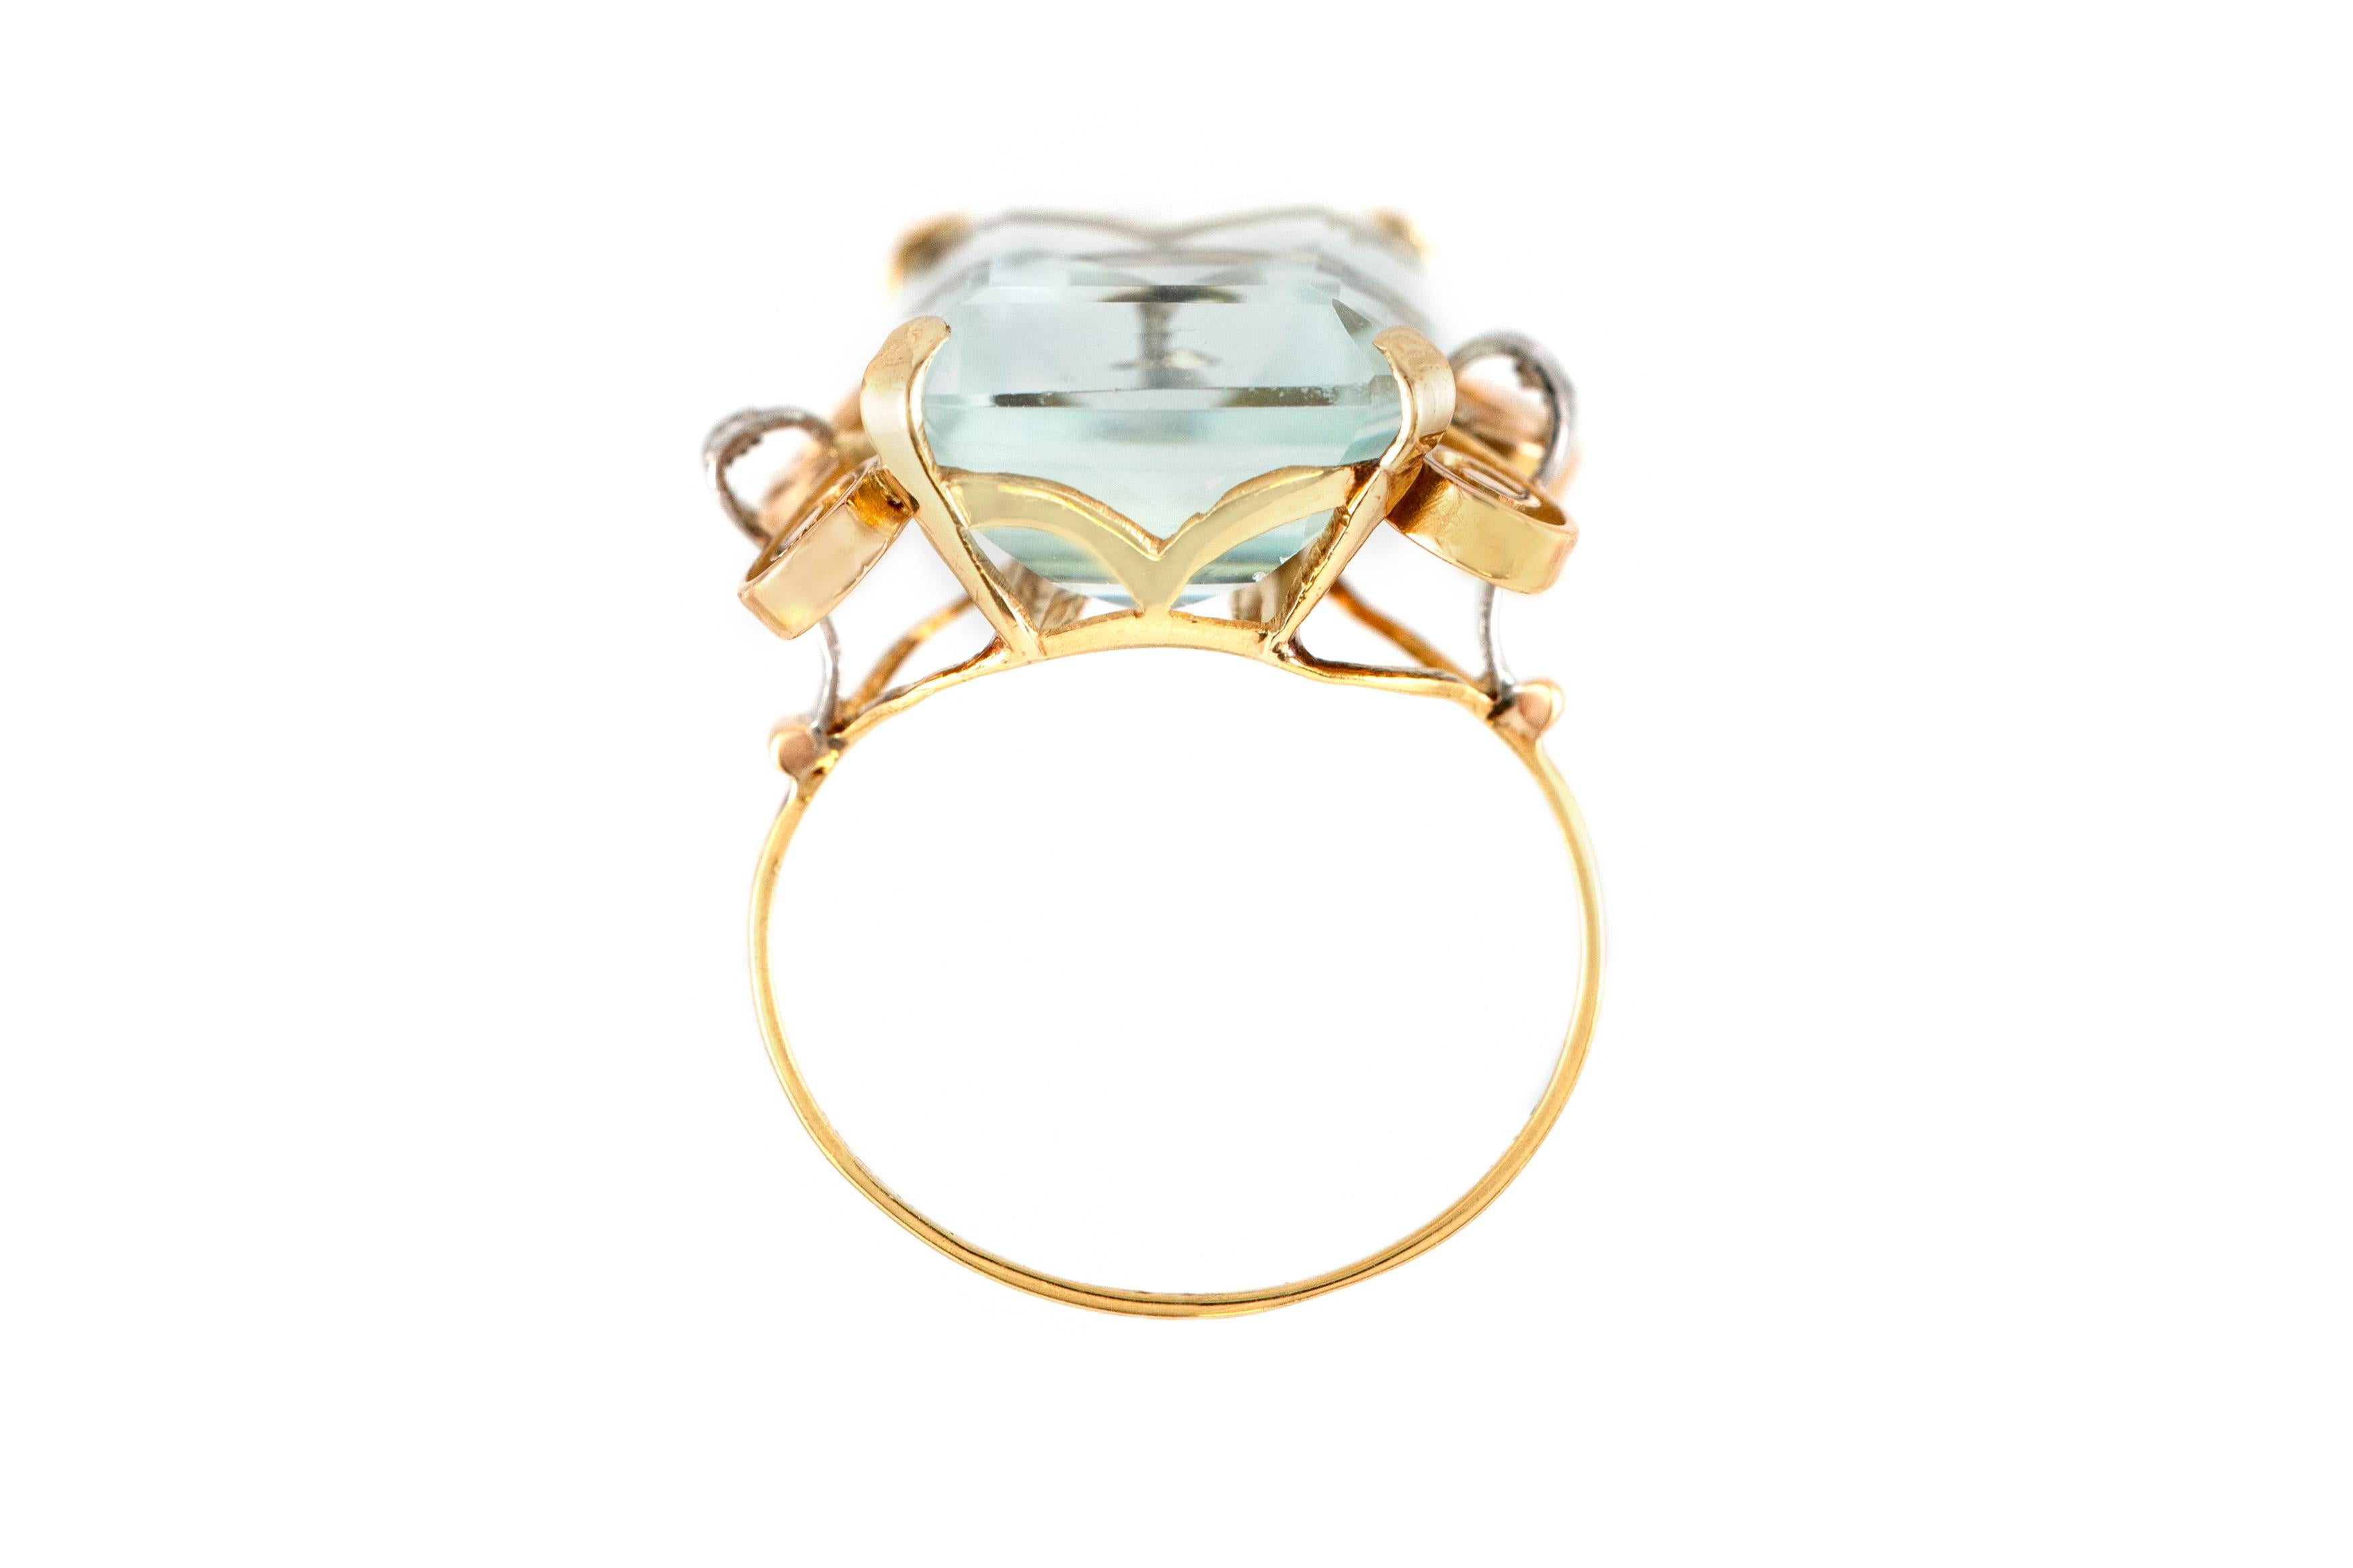 The ring is finely crafted in 18k yellow gold with two small diamonds on the sides and one aquamarine center stone weighing approximately total of 25.00 carat.